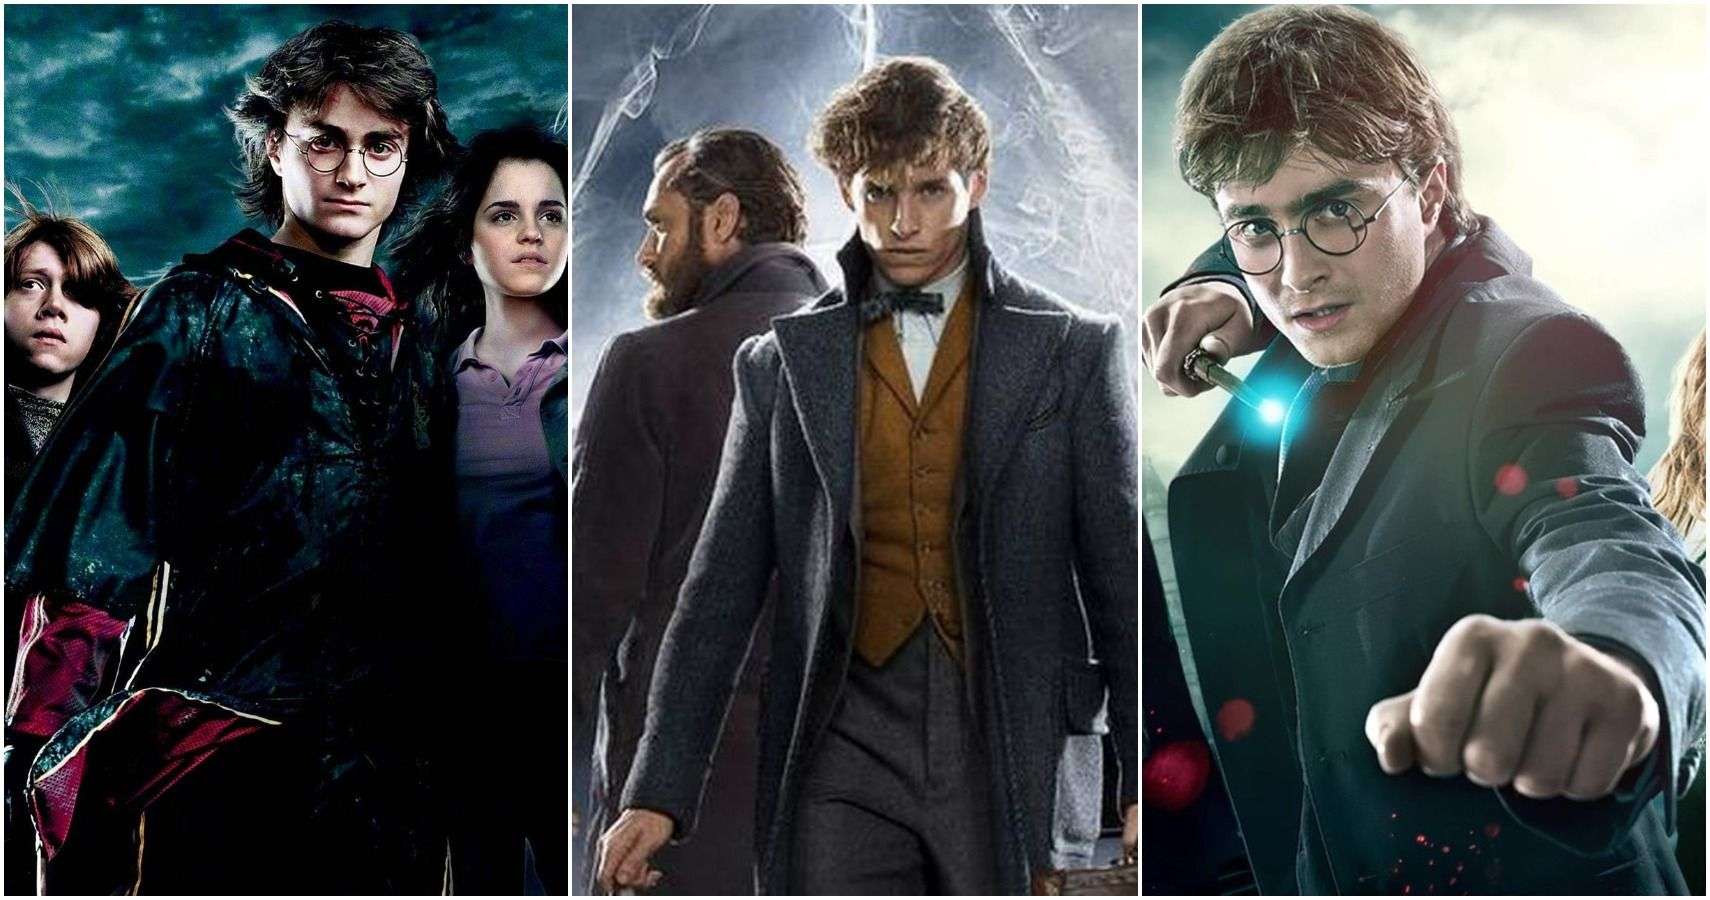 All The Harry Potter/Wizarding World Movies (Ranked By Metacritic)